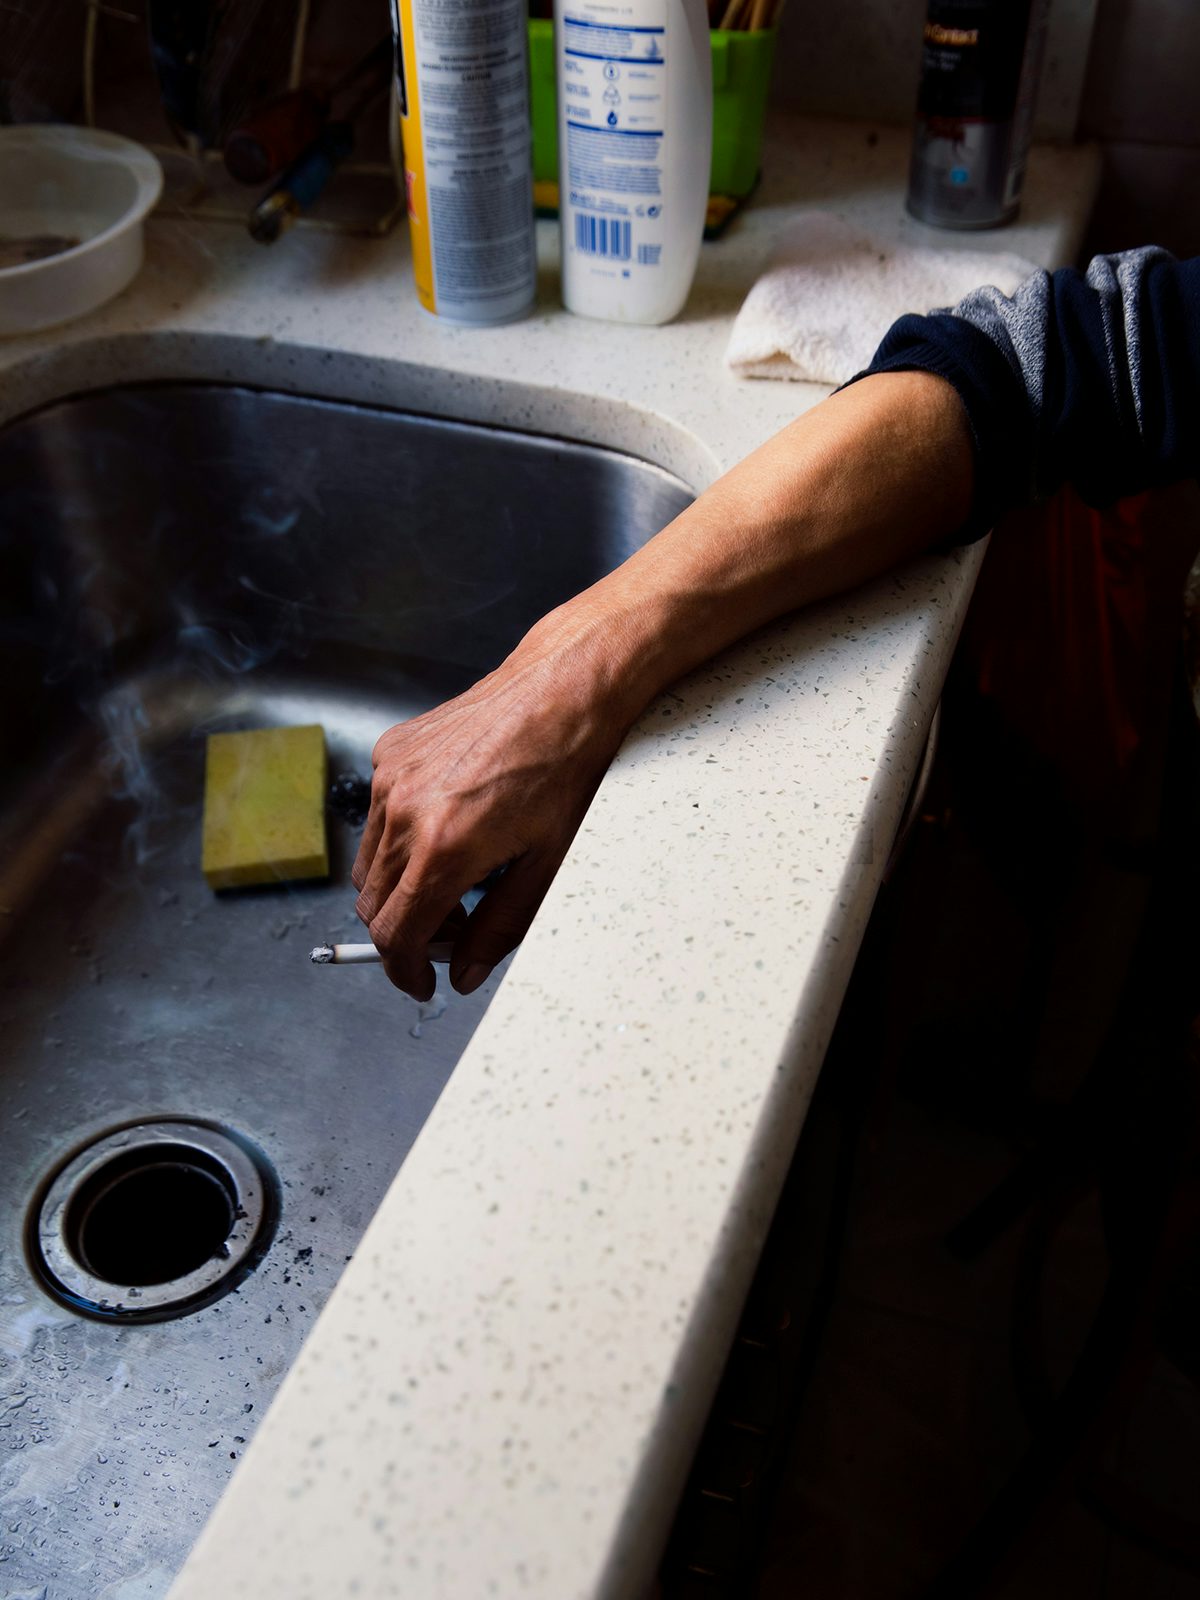 Image by Justin J Wee showing Mr Gao smoking a cigarette held over his kitchen sink